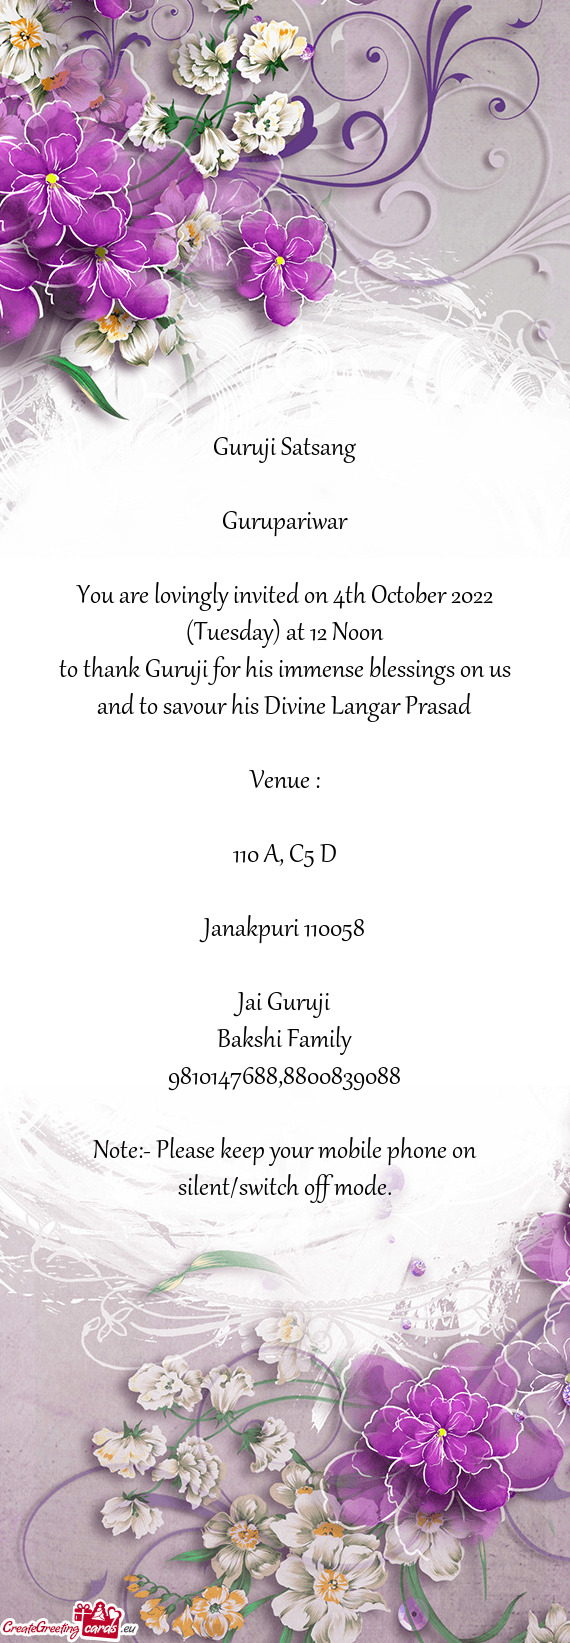 You are lovingly invited on 4th October 2022 (Tuesday) at 12 Noon